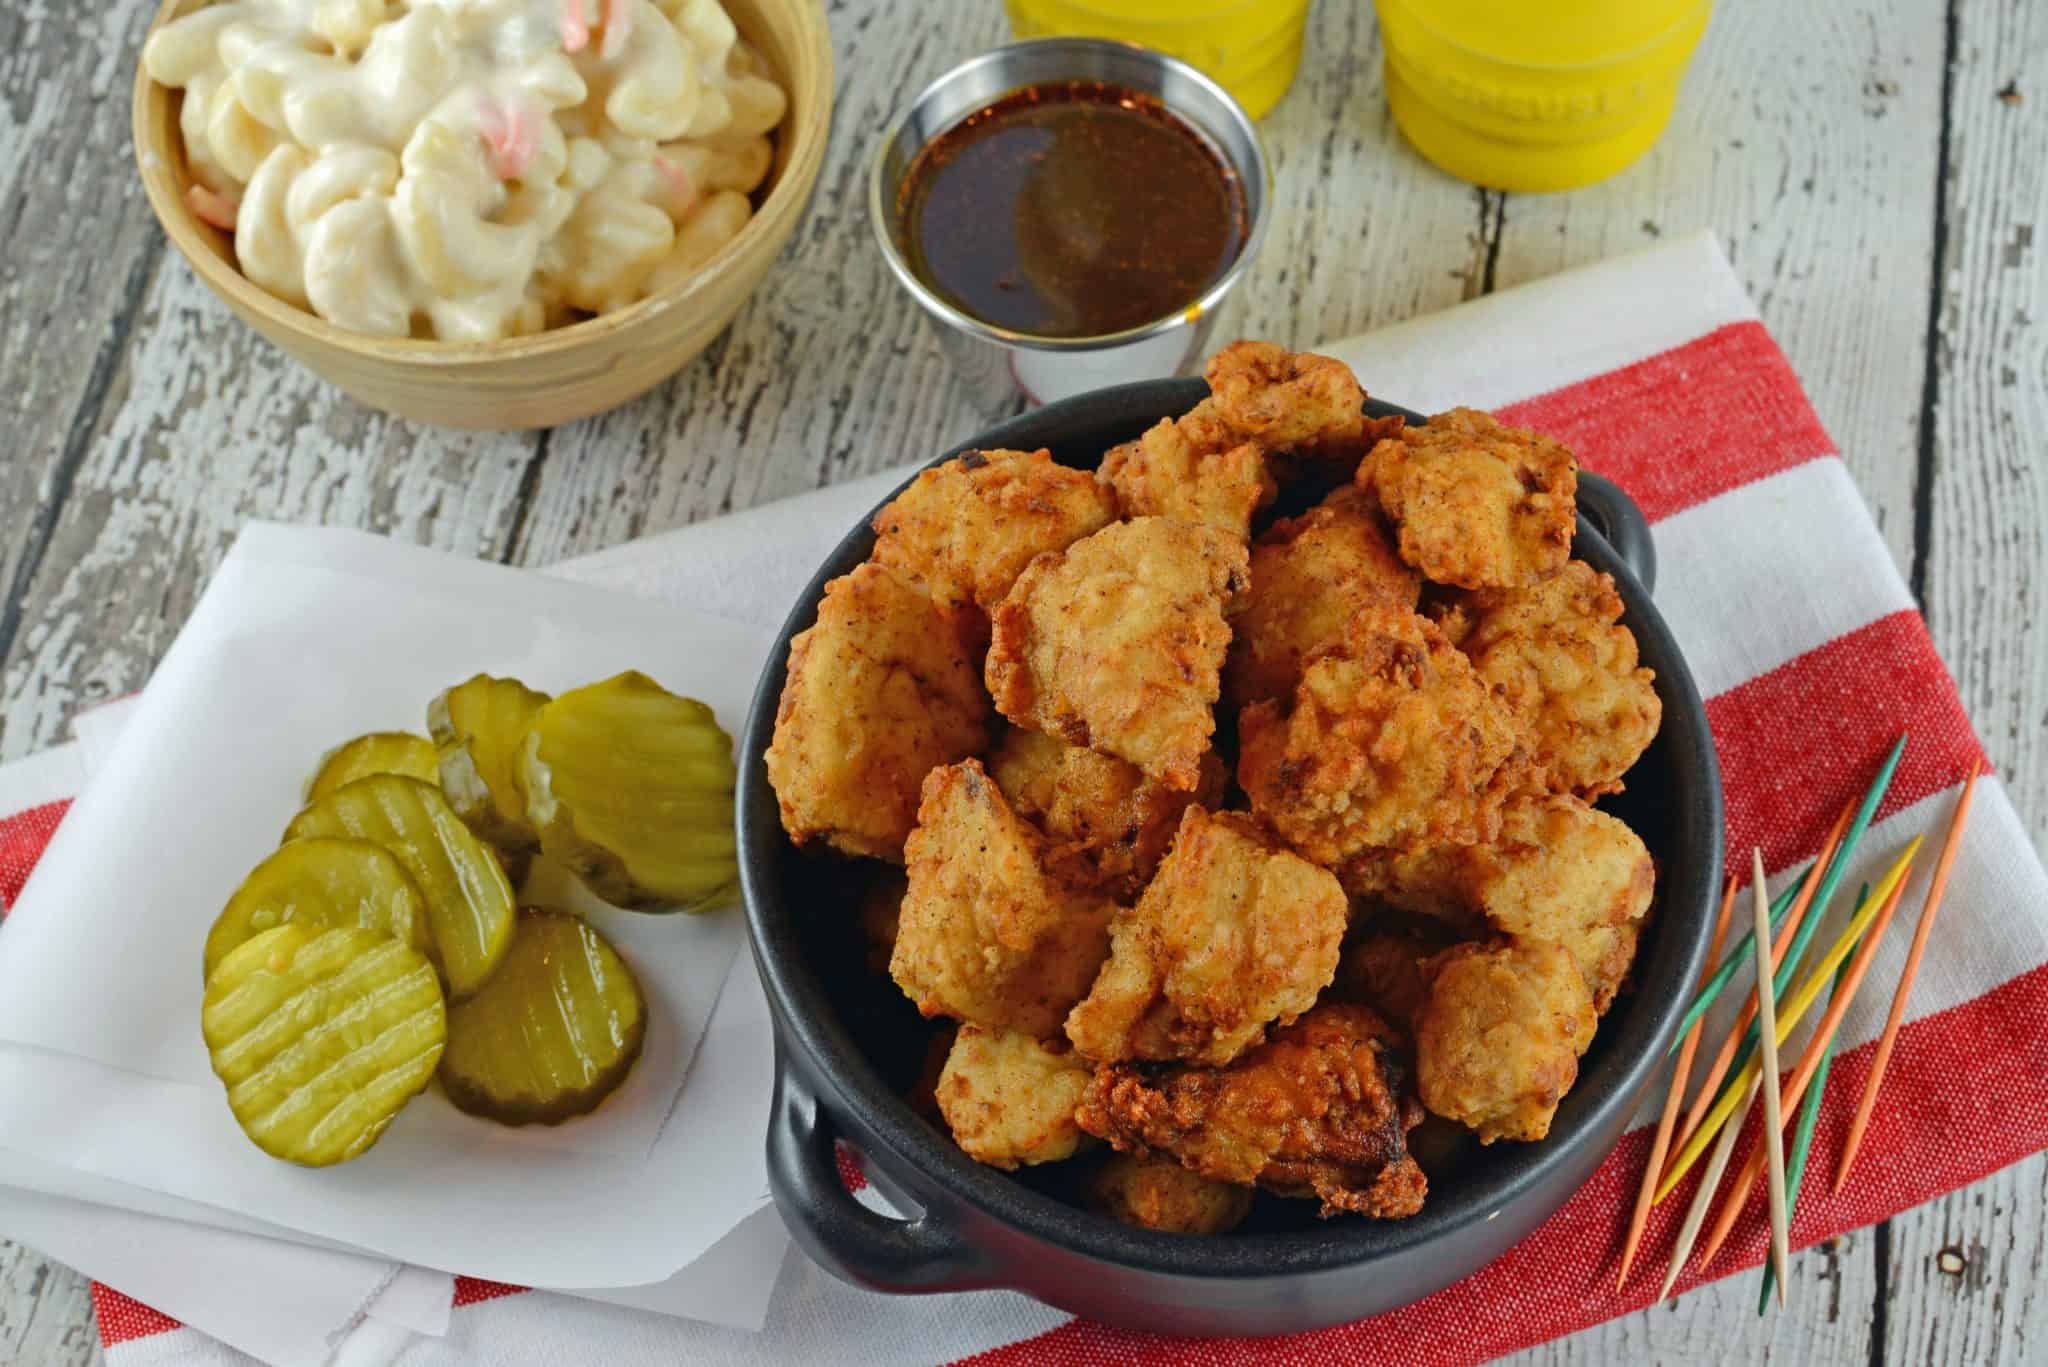 This Popcorn Chicken Recipe is a simple and easy to make deliciously crispy popcorn chicken bites at home. Great for game days, parties or even lunch! #popcornchicken #howtomakepopcornchicken www.savoryexperiments.com 